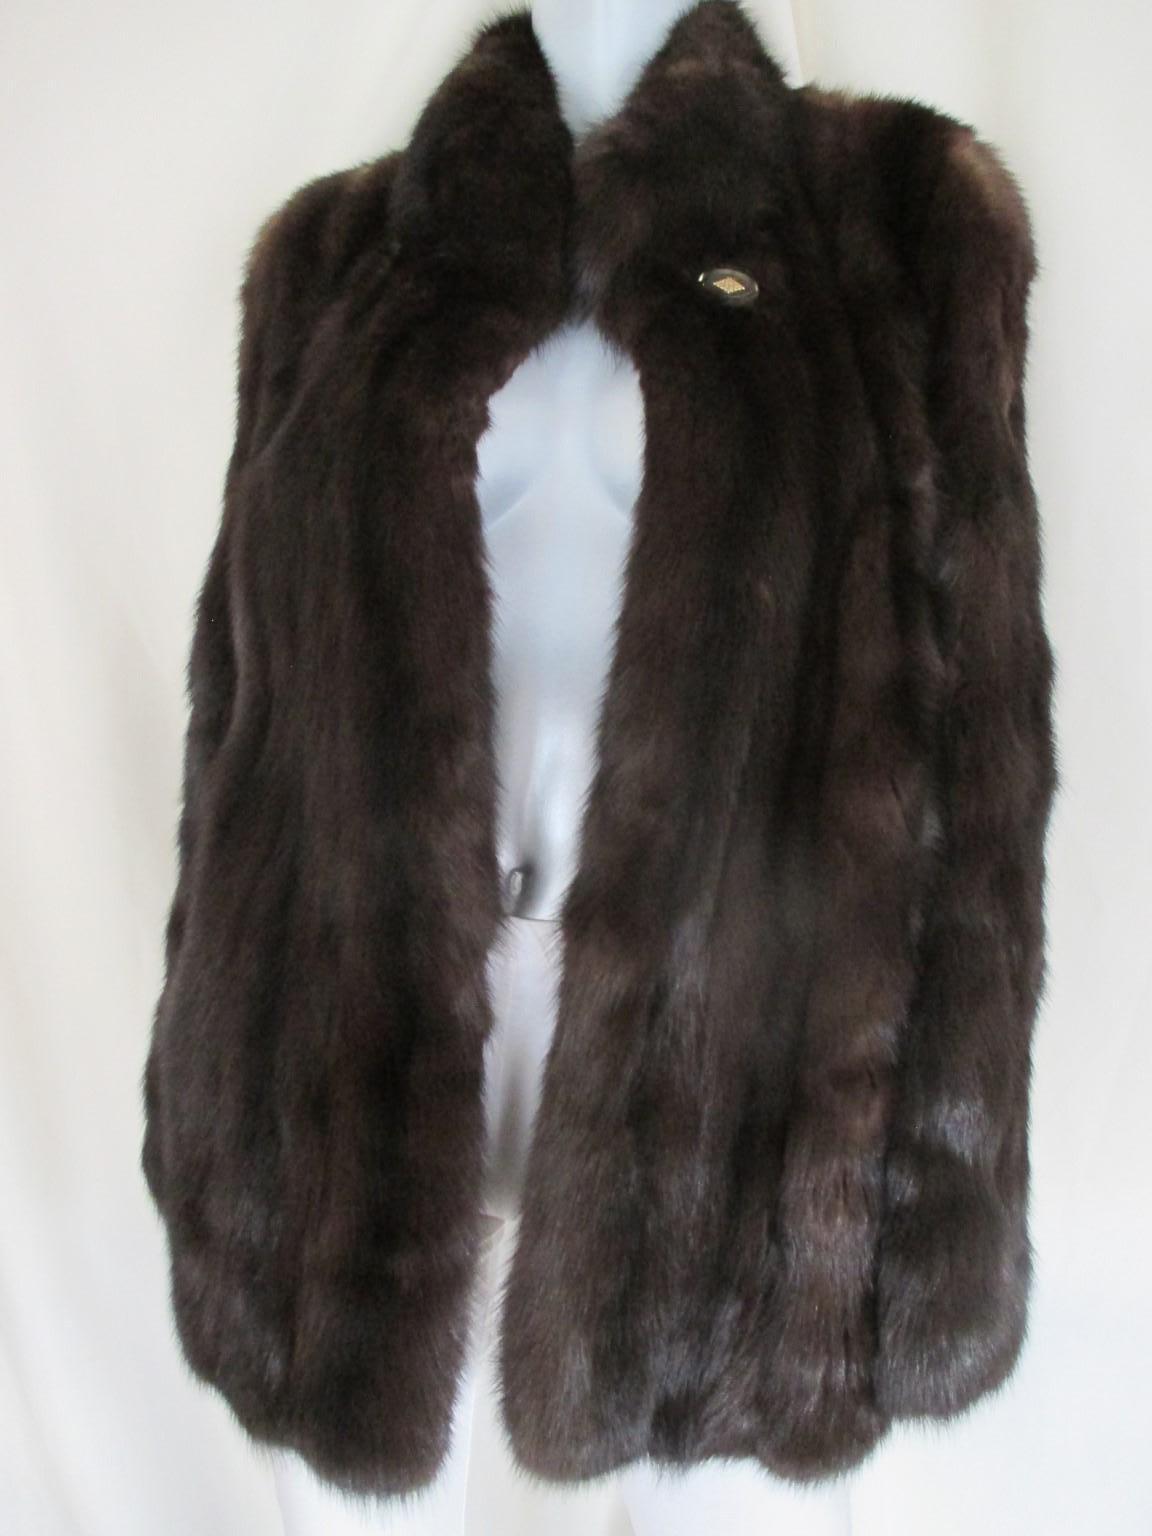 Beautiful high quality sable fur coat.

We offer more luxury fur items, view our frontstore.

Details:
This coat is soft and supple, light to wear has 2 velvet pockets,  
1 closing button at the collar and 3 closing hooks.
Furrier: Jacques